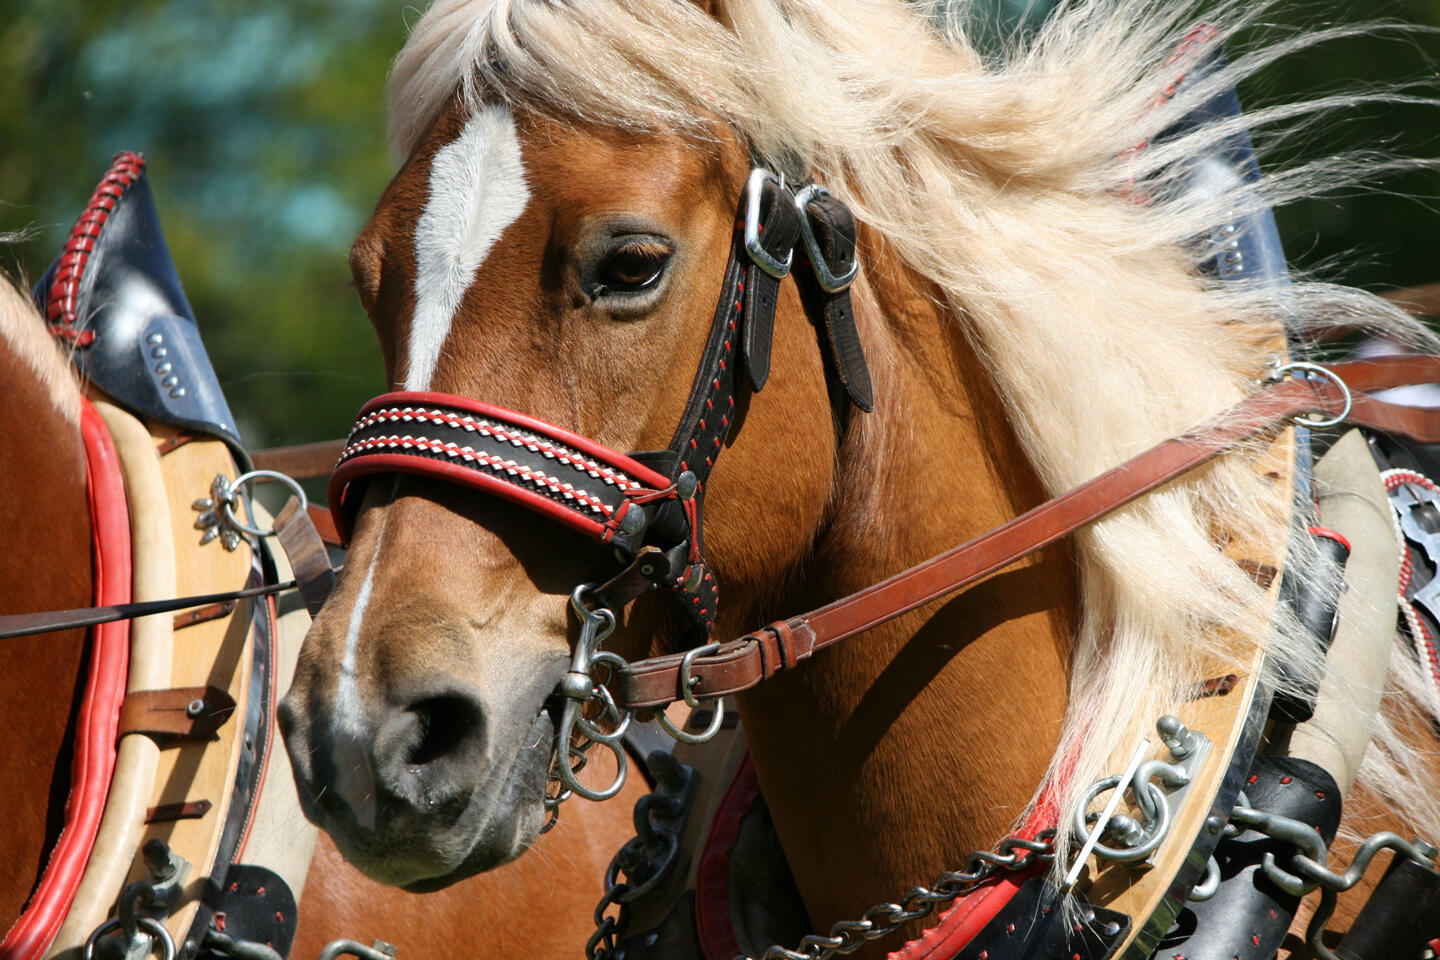 Horse at the Paris Horse Show with decorative harness